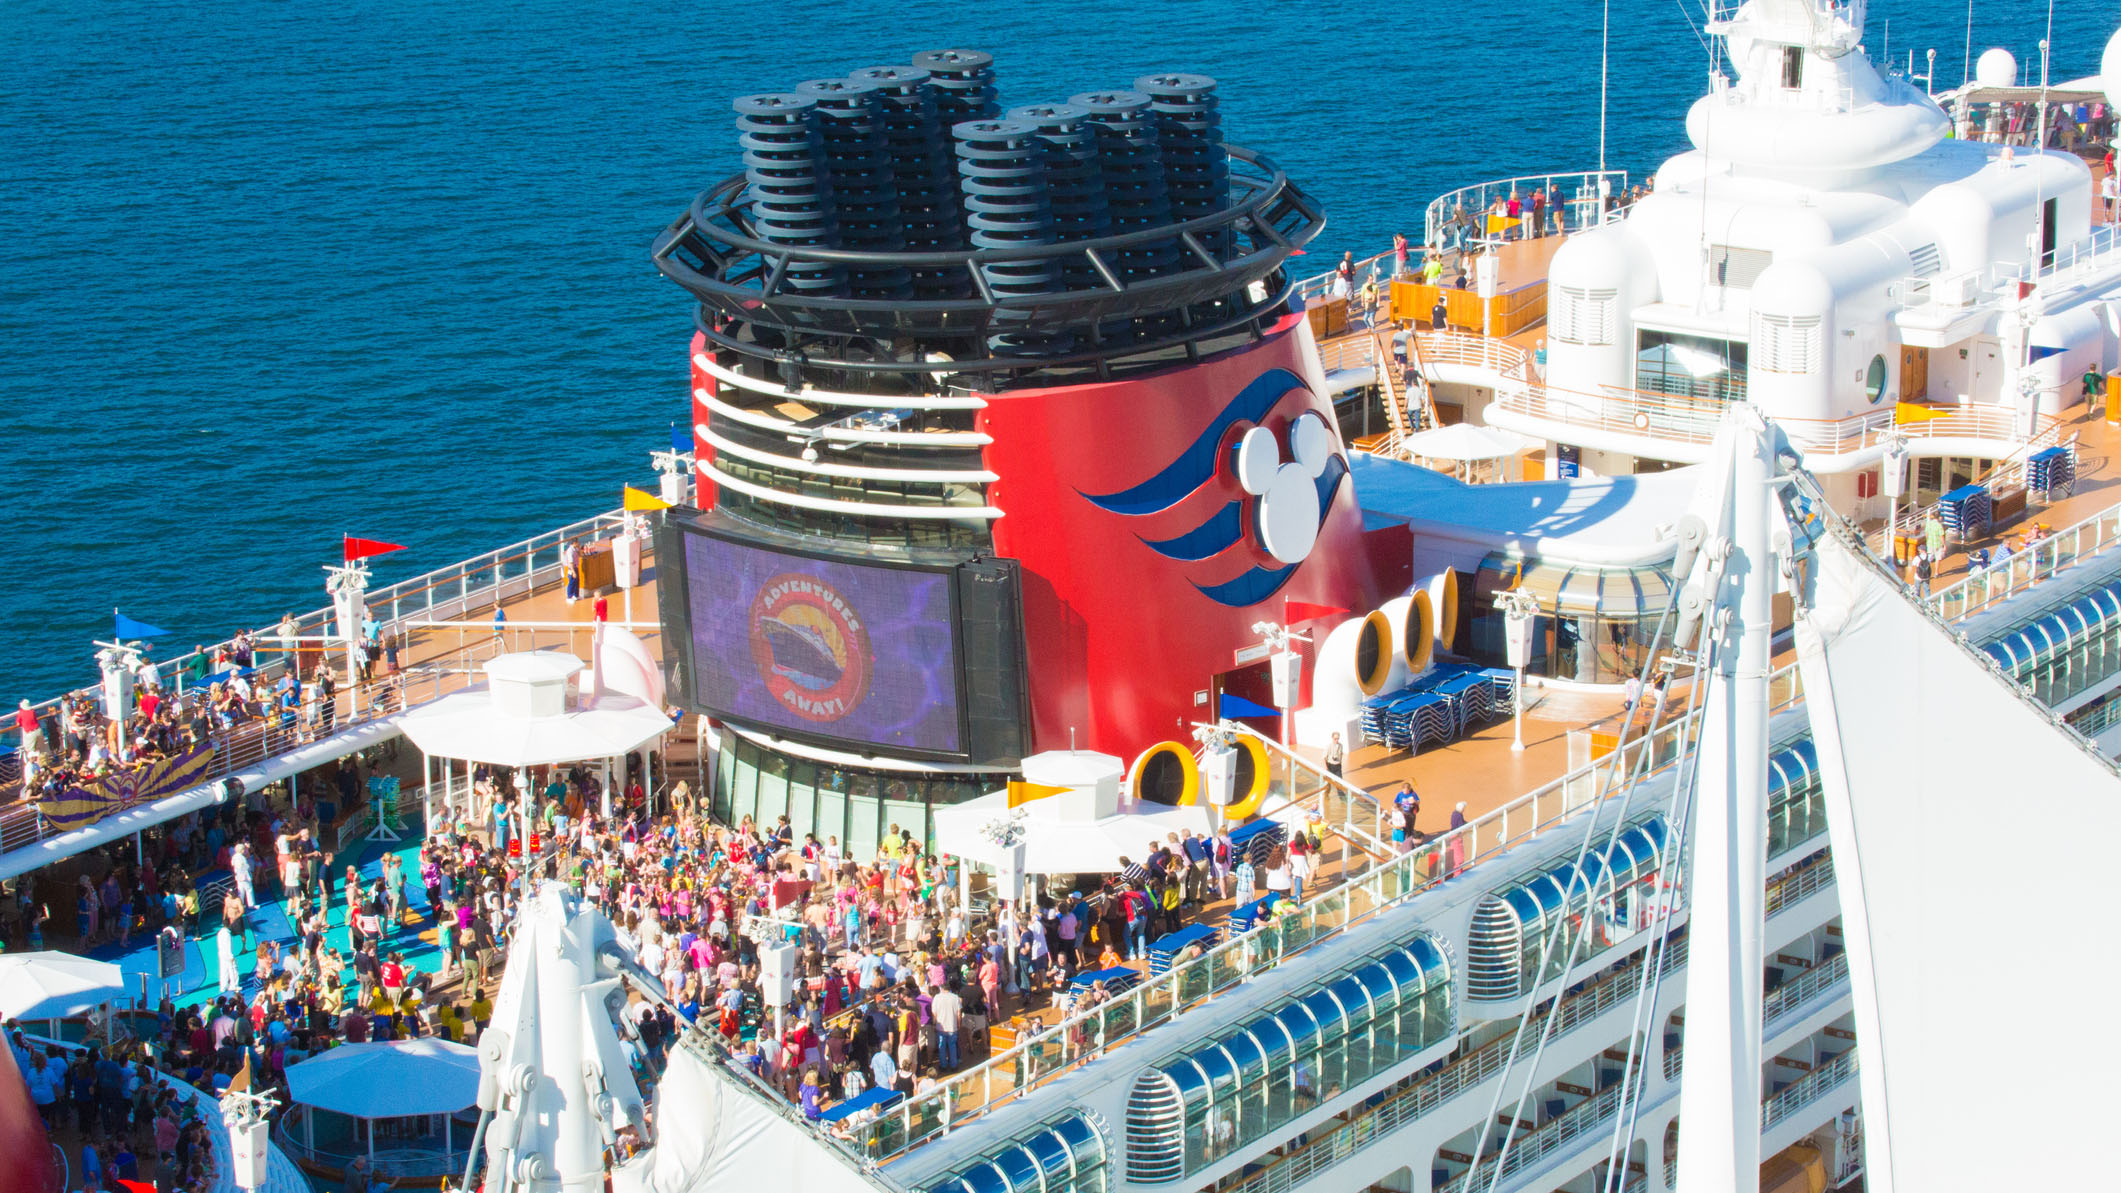 The new Disney Wish: The world's most magical cruise ship (PHOTOS